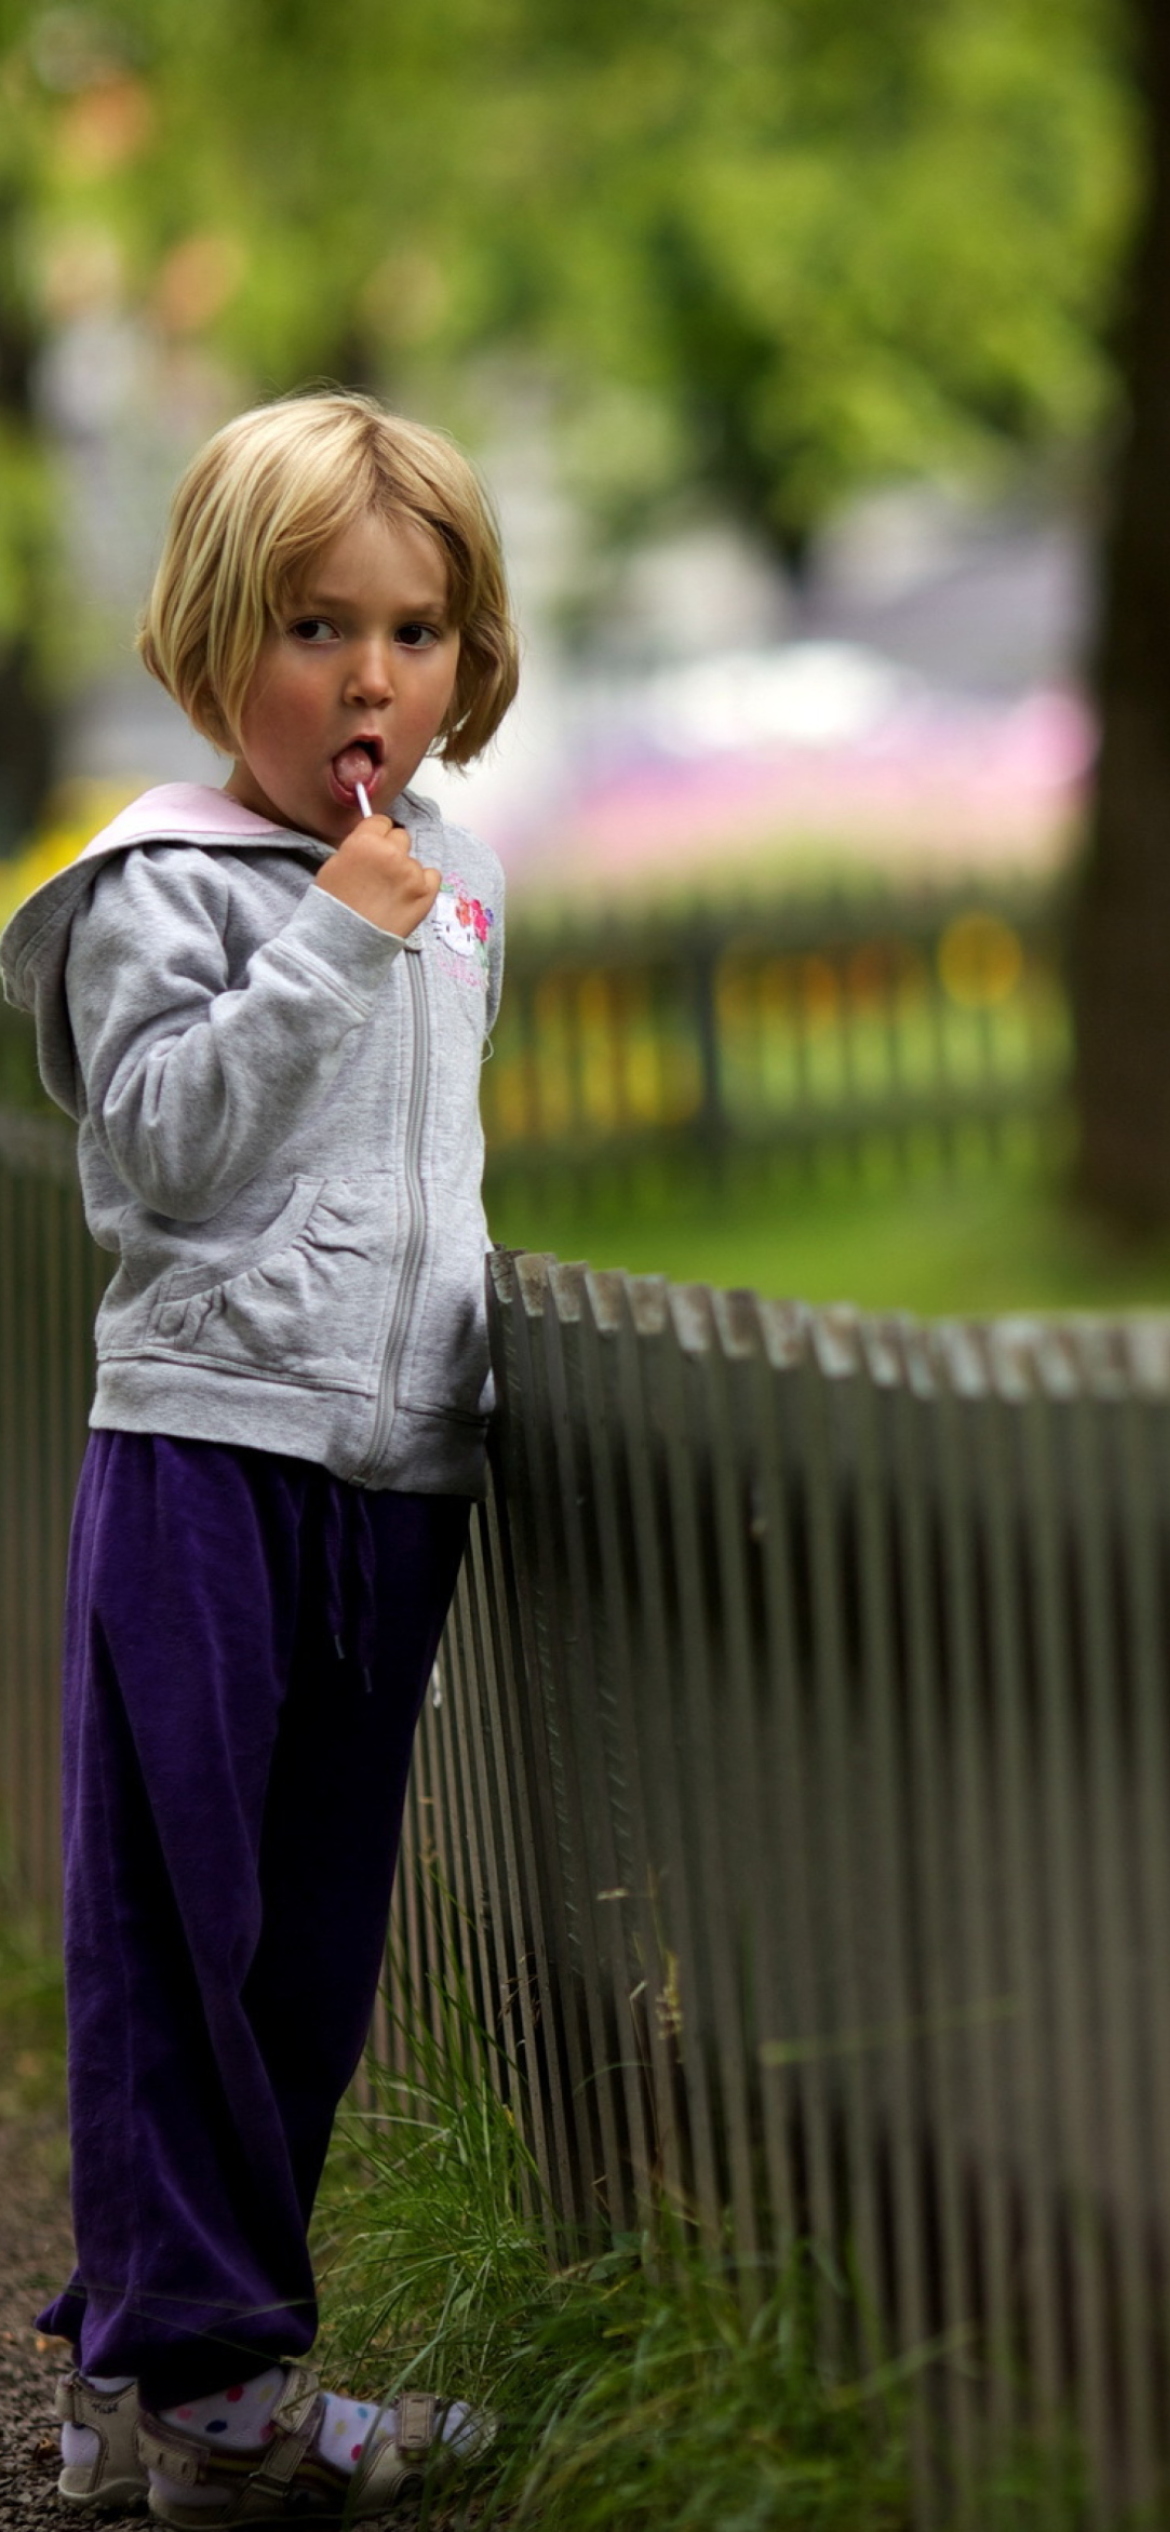 Little Girl With Lolly wallpaper 1170x2532